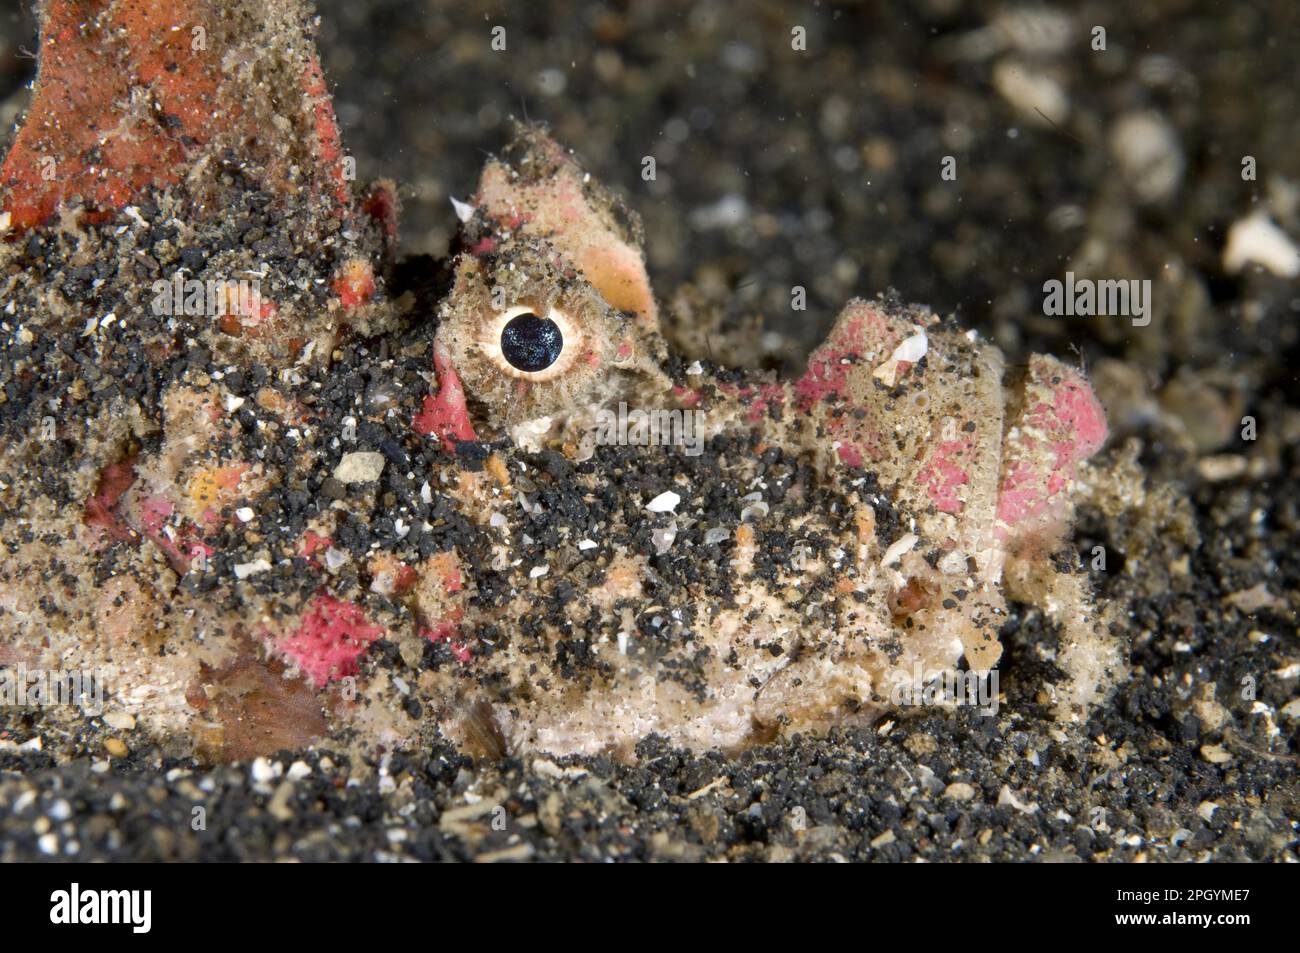 Poisonous, Devilfish, demon stinger (Inimicus didactylus), Other animals, Fish, Perch-like, Animals, Red Spiny Devilfish adult, close-up of head Stock Photo